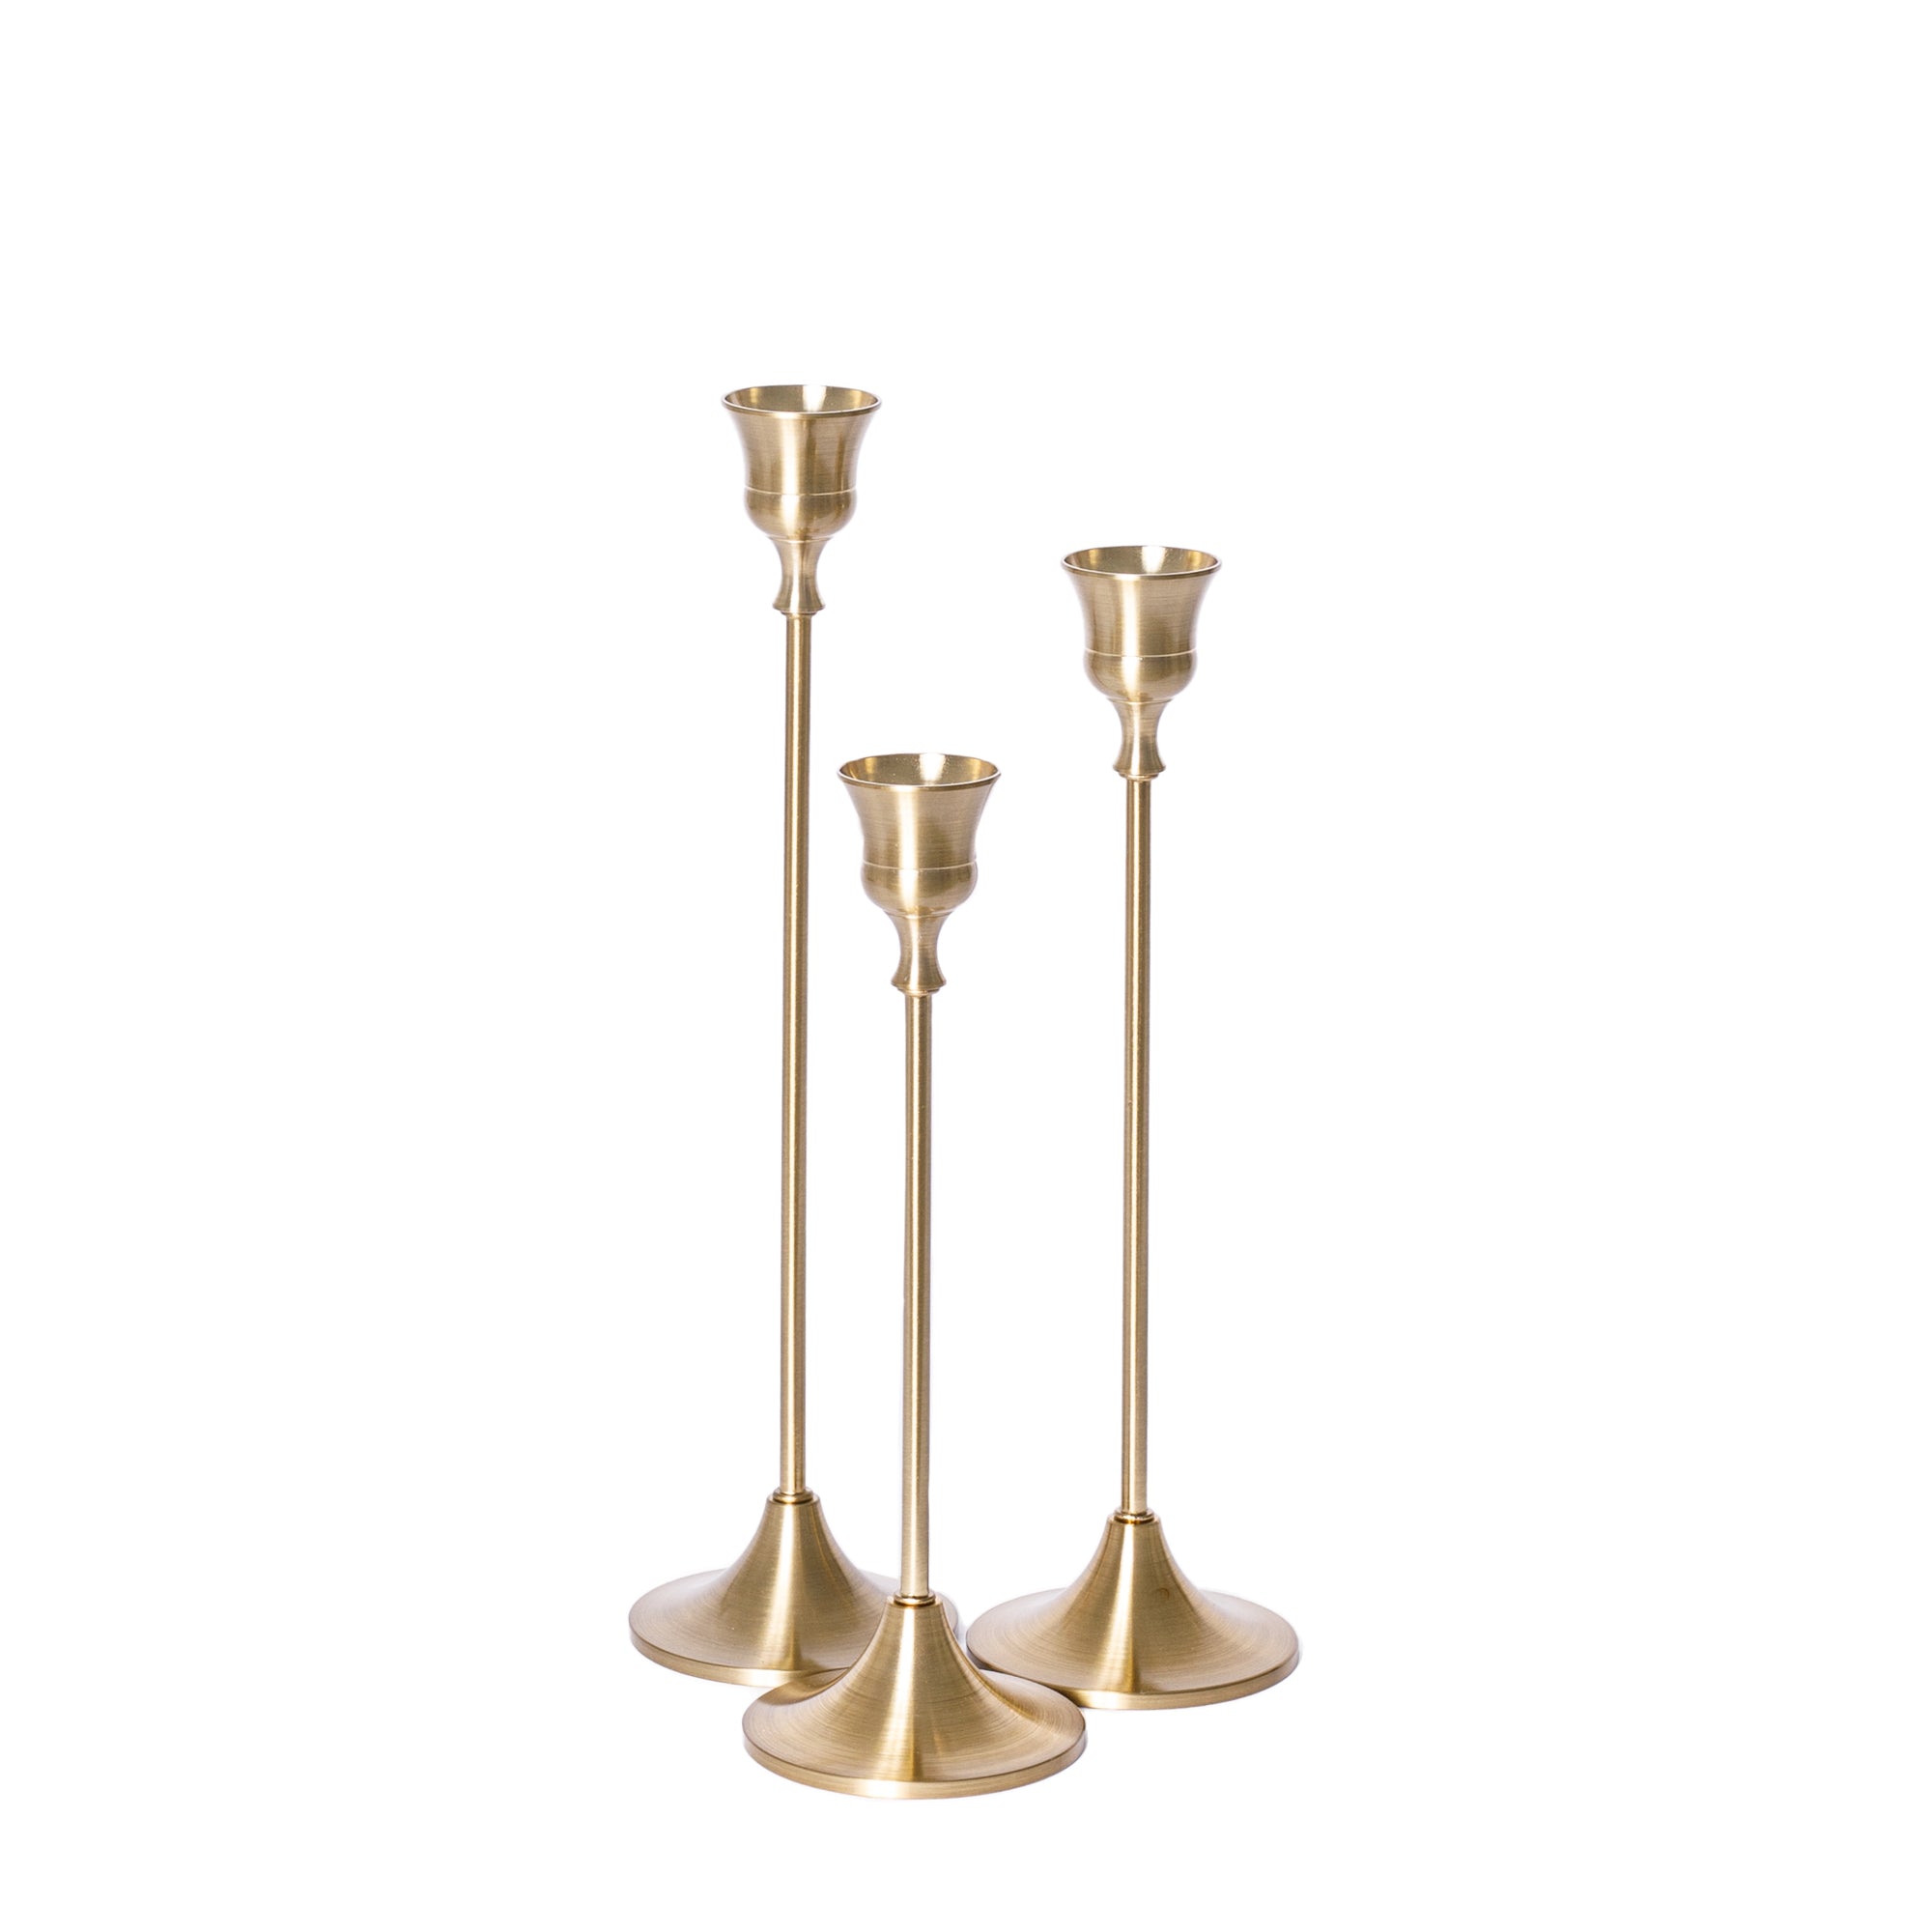 Gold tapered candlesticks for hire | For Love & Living Gold Coast Weddings & Events